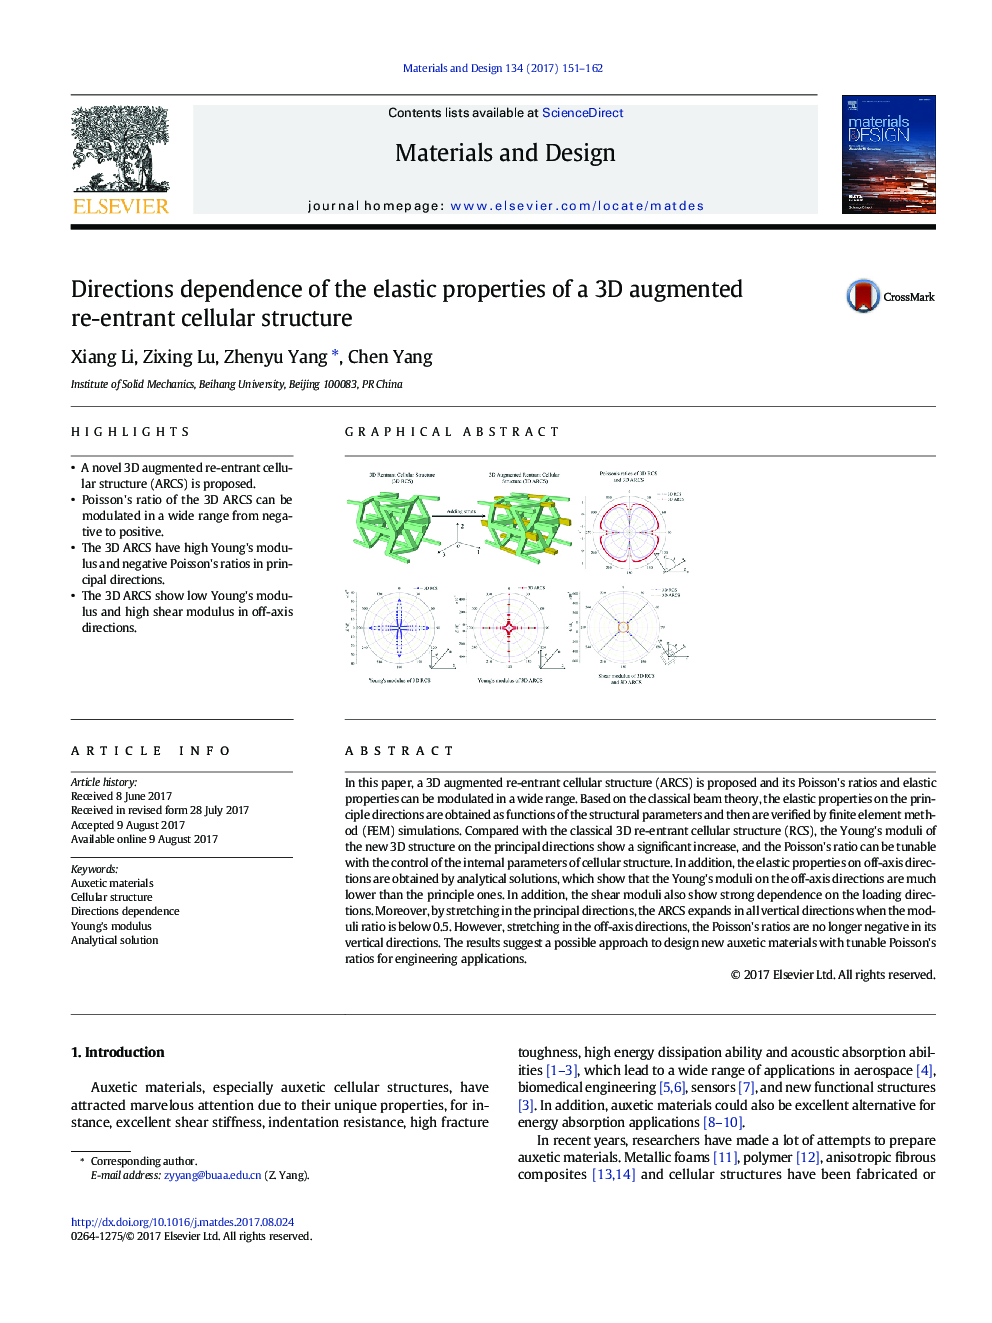 Directions dependence of the elastic properties of a 3D augmented re-entrant cellular structure